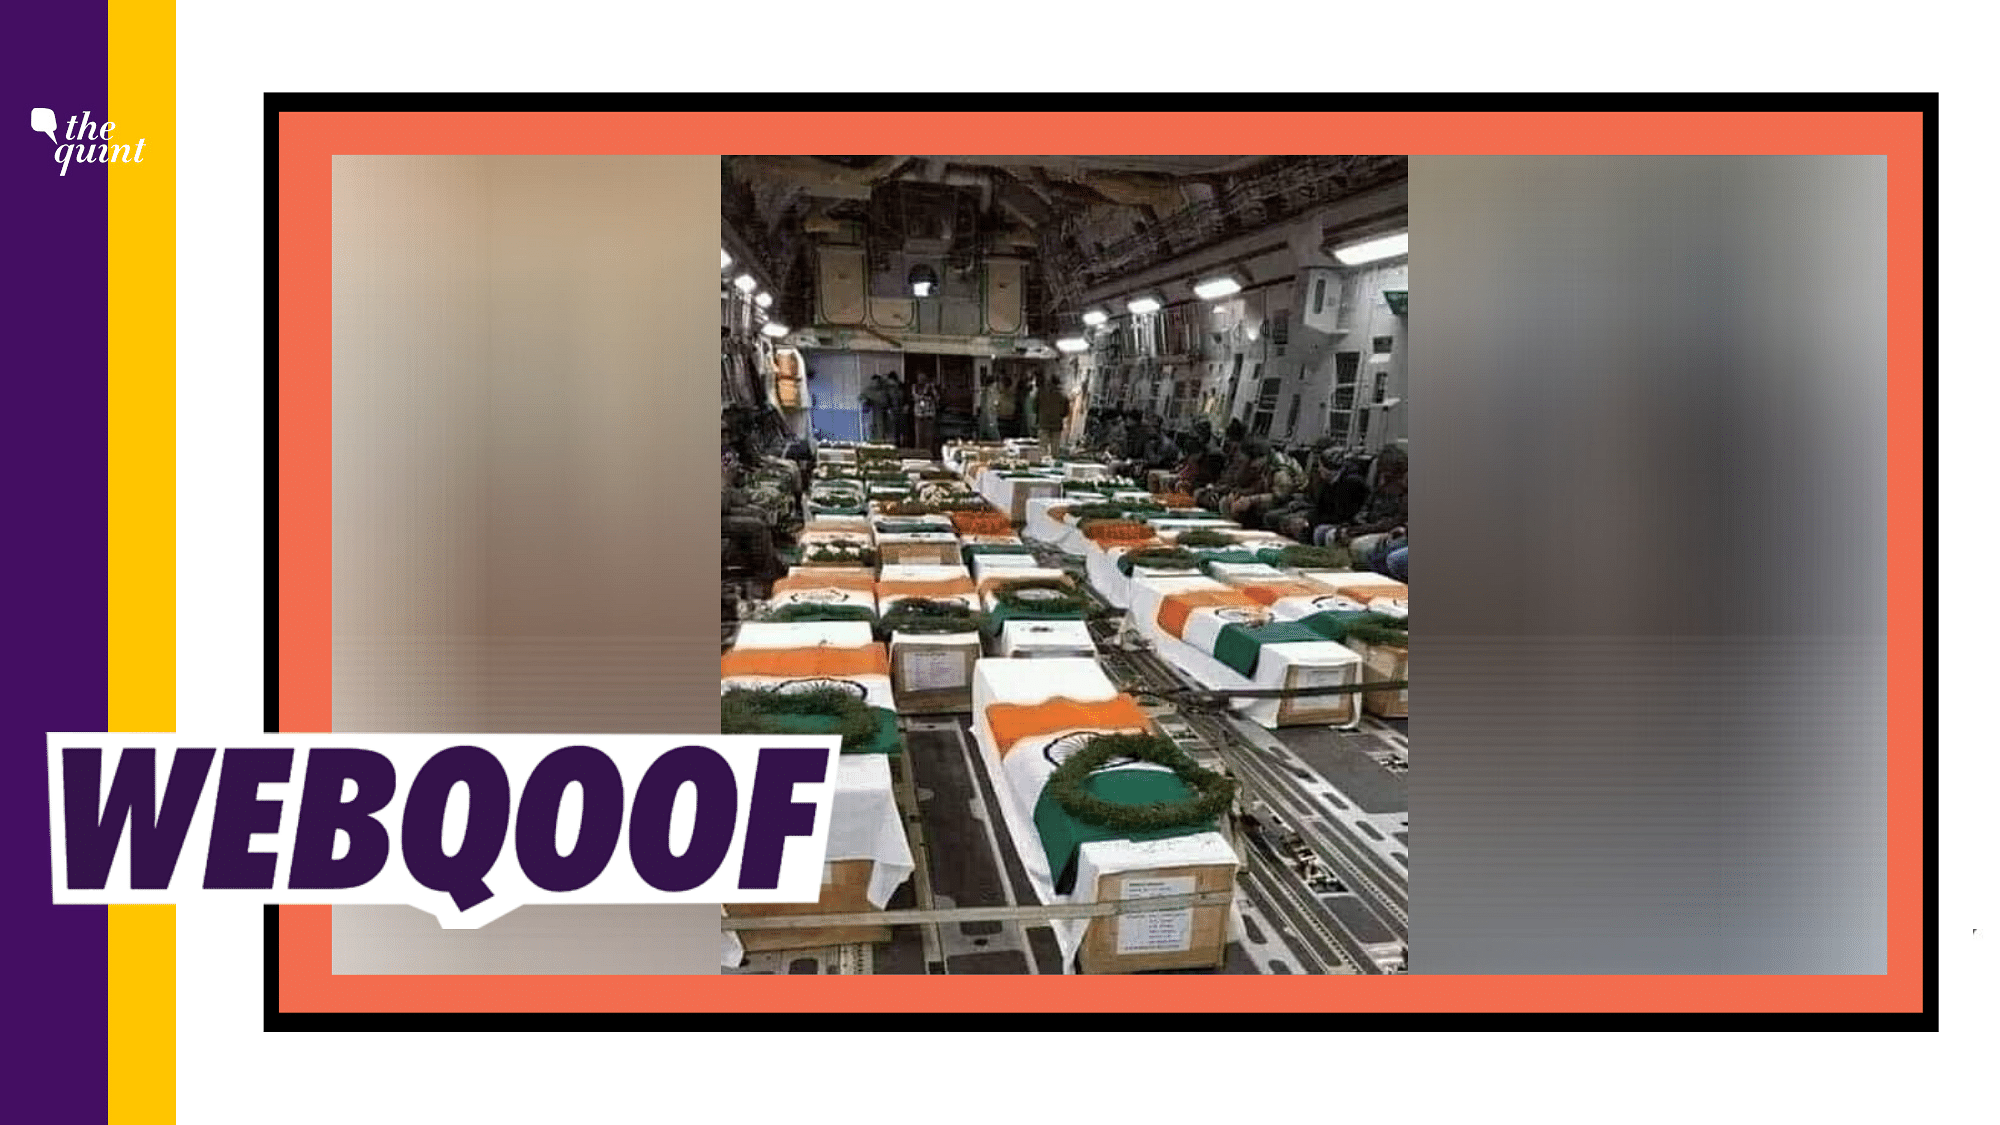 Many people shared this photo of the coffins wrapped in the Indian flag in the aftermath of the Galwan face-off.